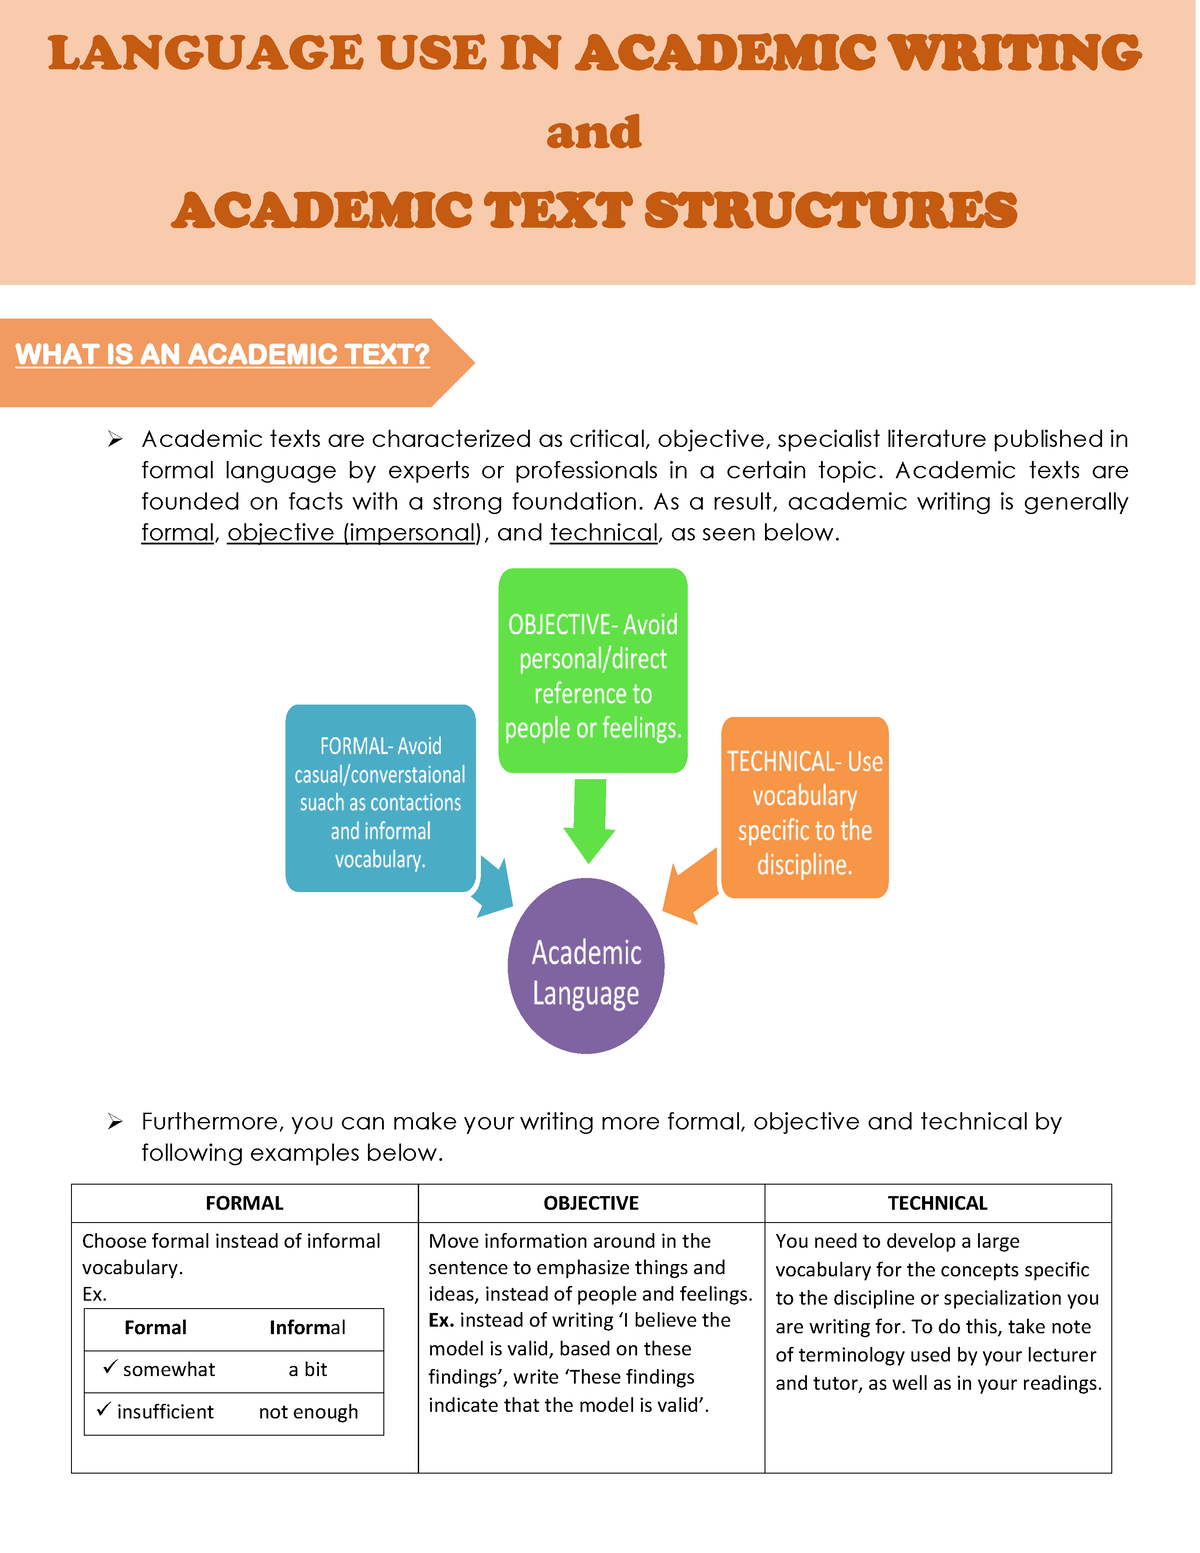 Academic Writing and Academic TEXT StructuresEAPP Academic texts are